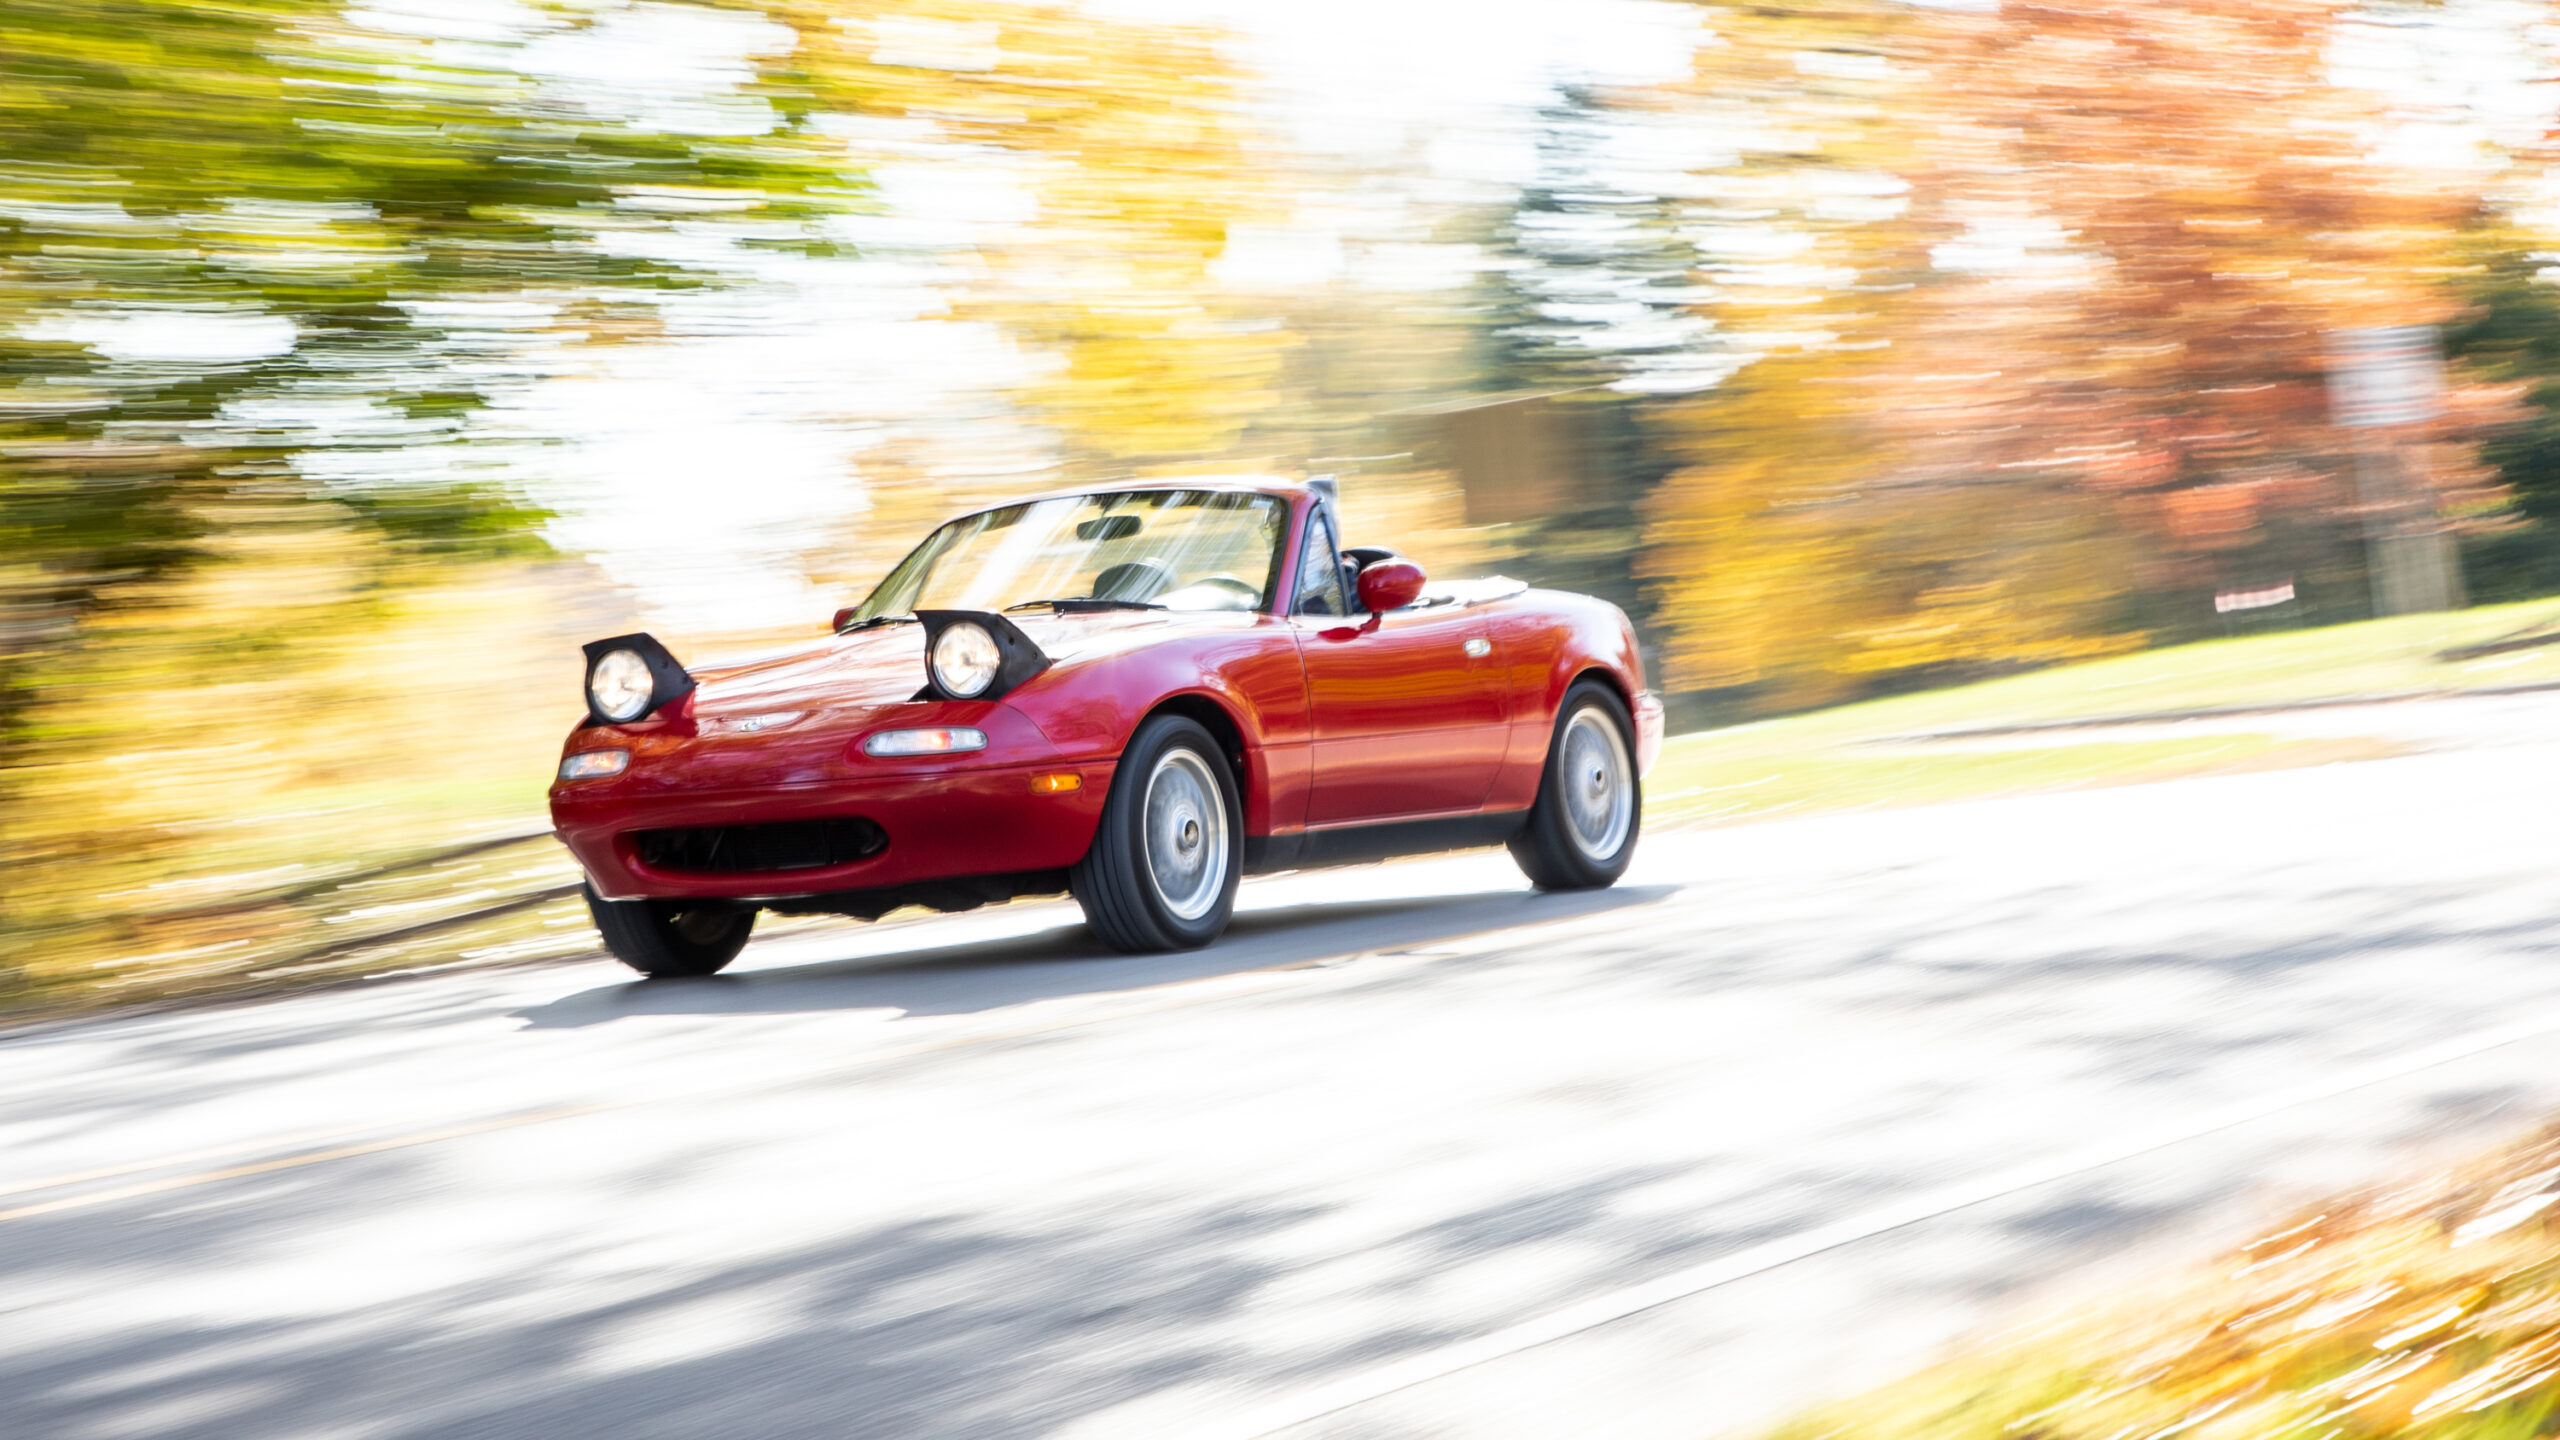 For roadster lovers, Mazda’s MX-5 is (still) the answer